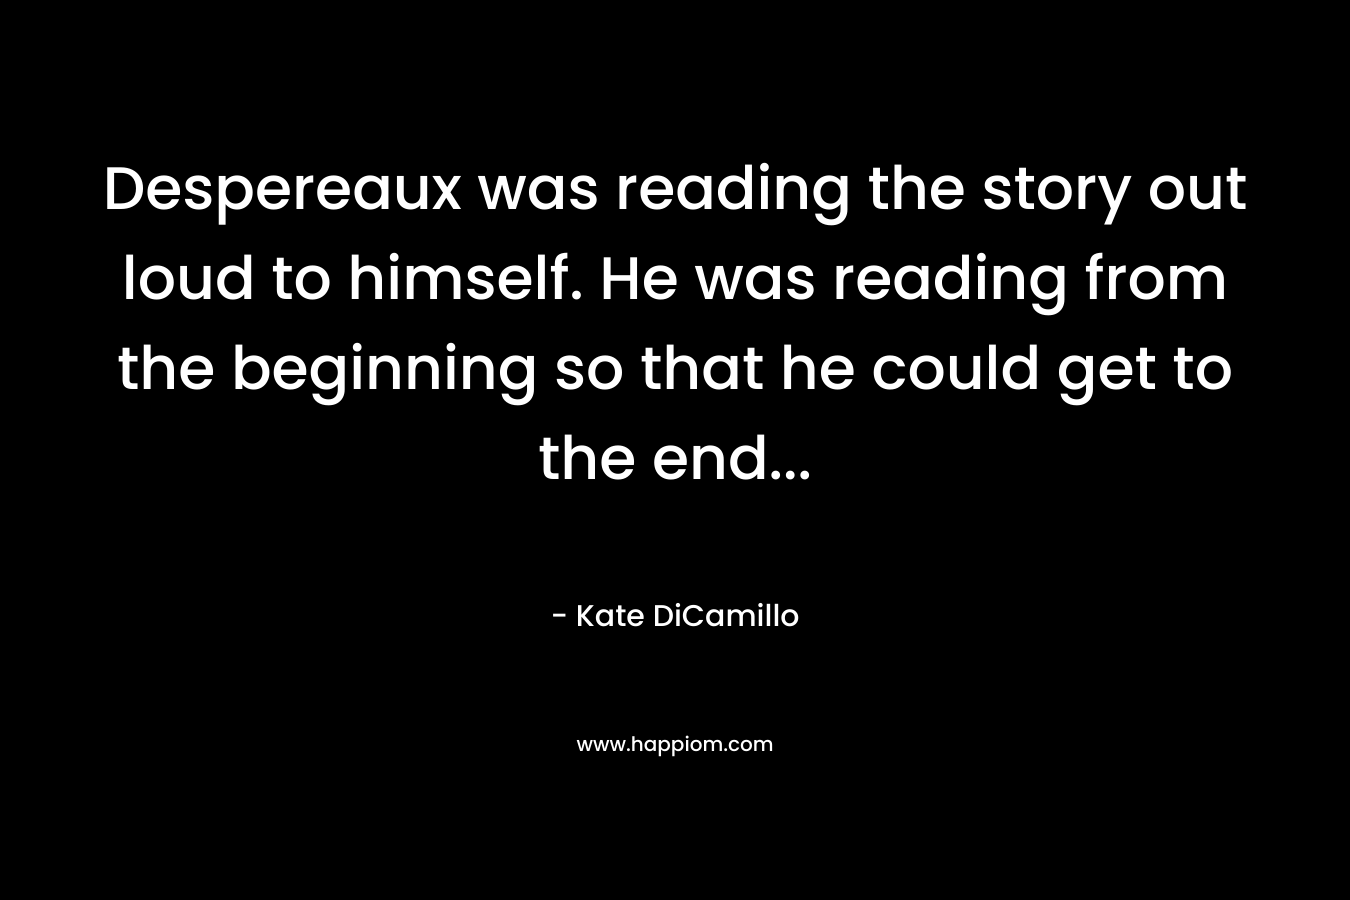 Despereaux was reading the story out loud to himself. He was reading from the beginning so that he could get to the end...